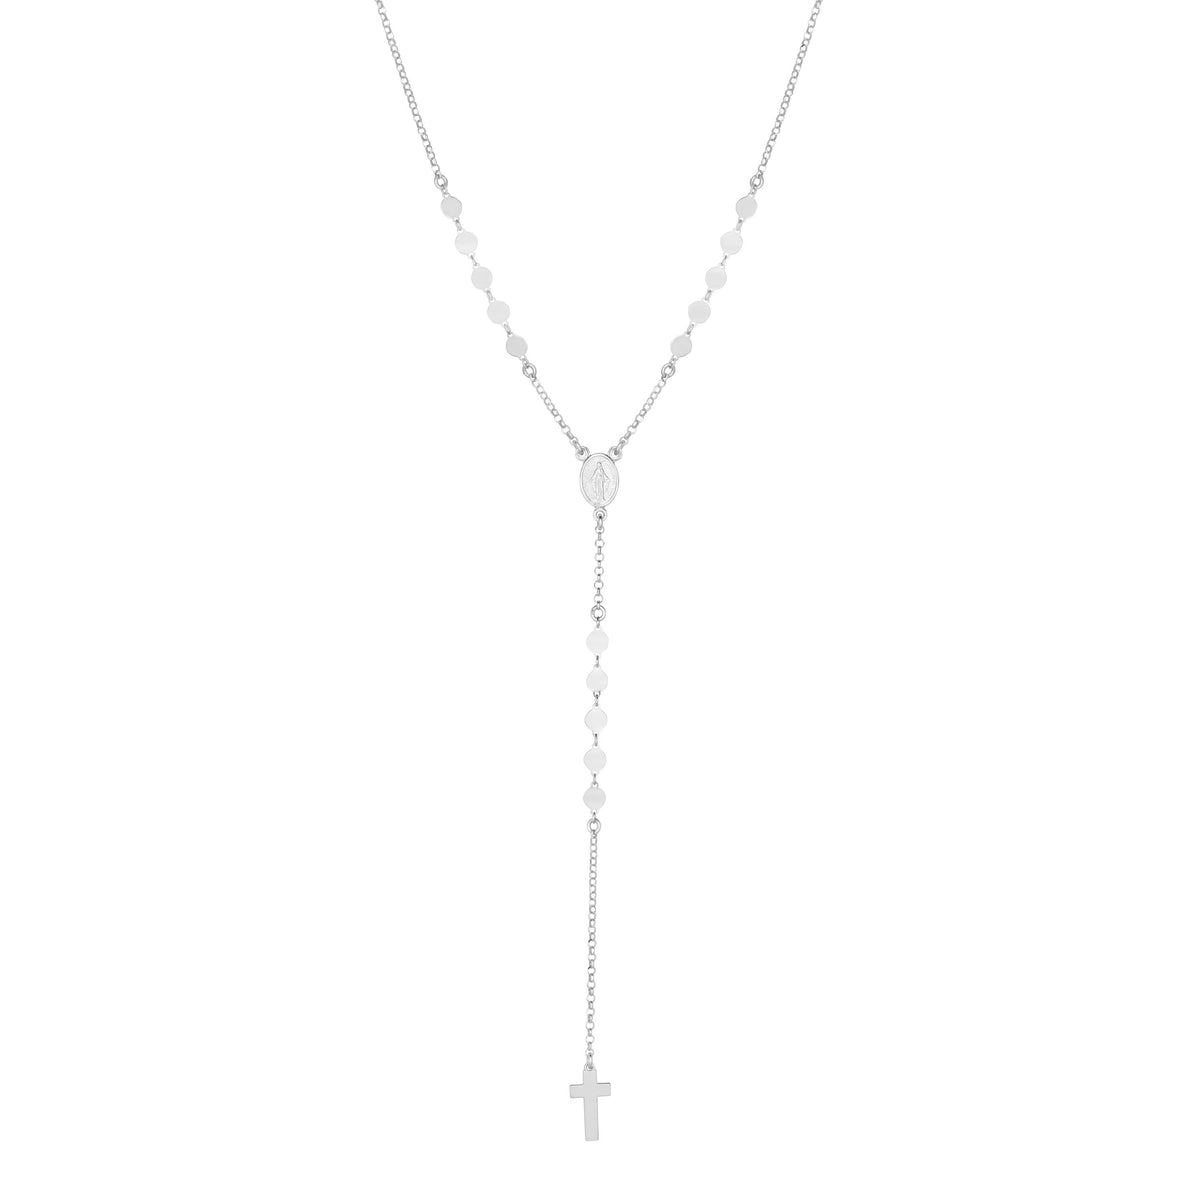 Sterling Silver Religious Cross Chain Necklace, 24"